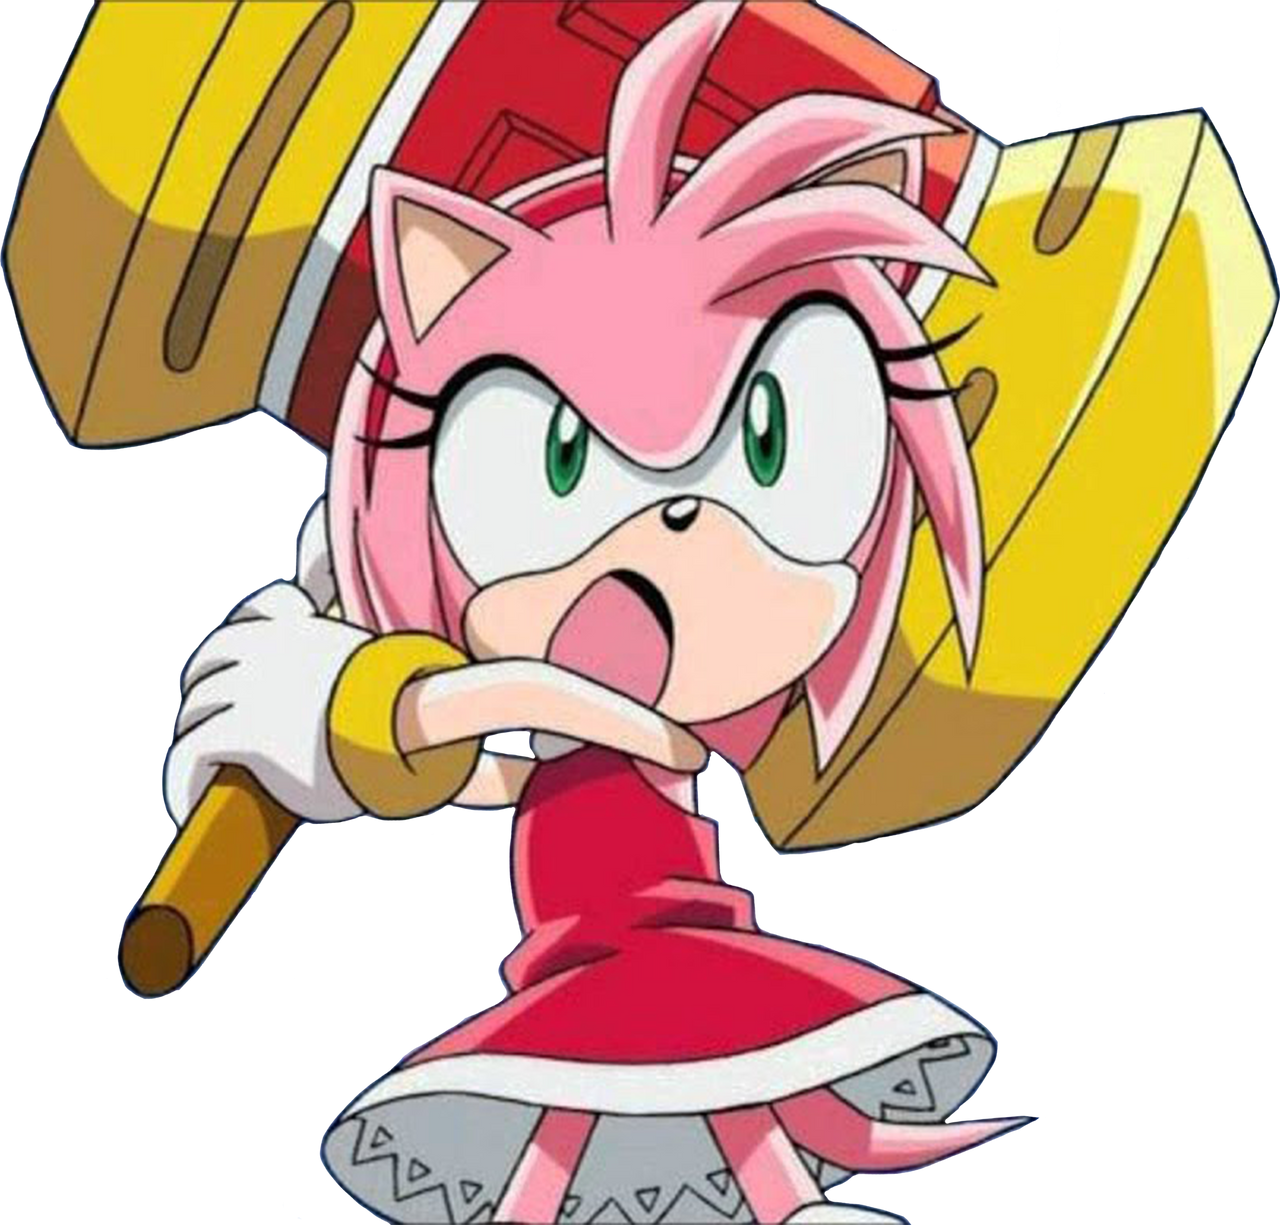 Amy Rose (Sonic X) falling down vector by HomerSimpson1983 on